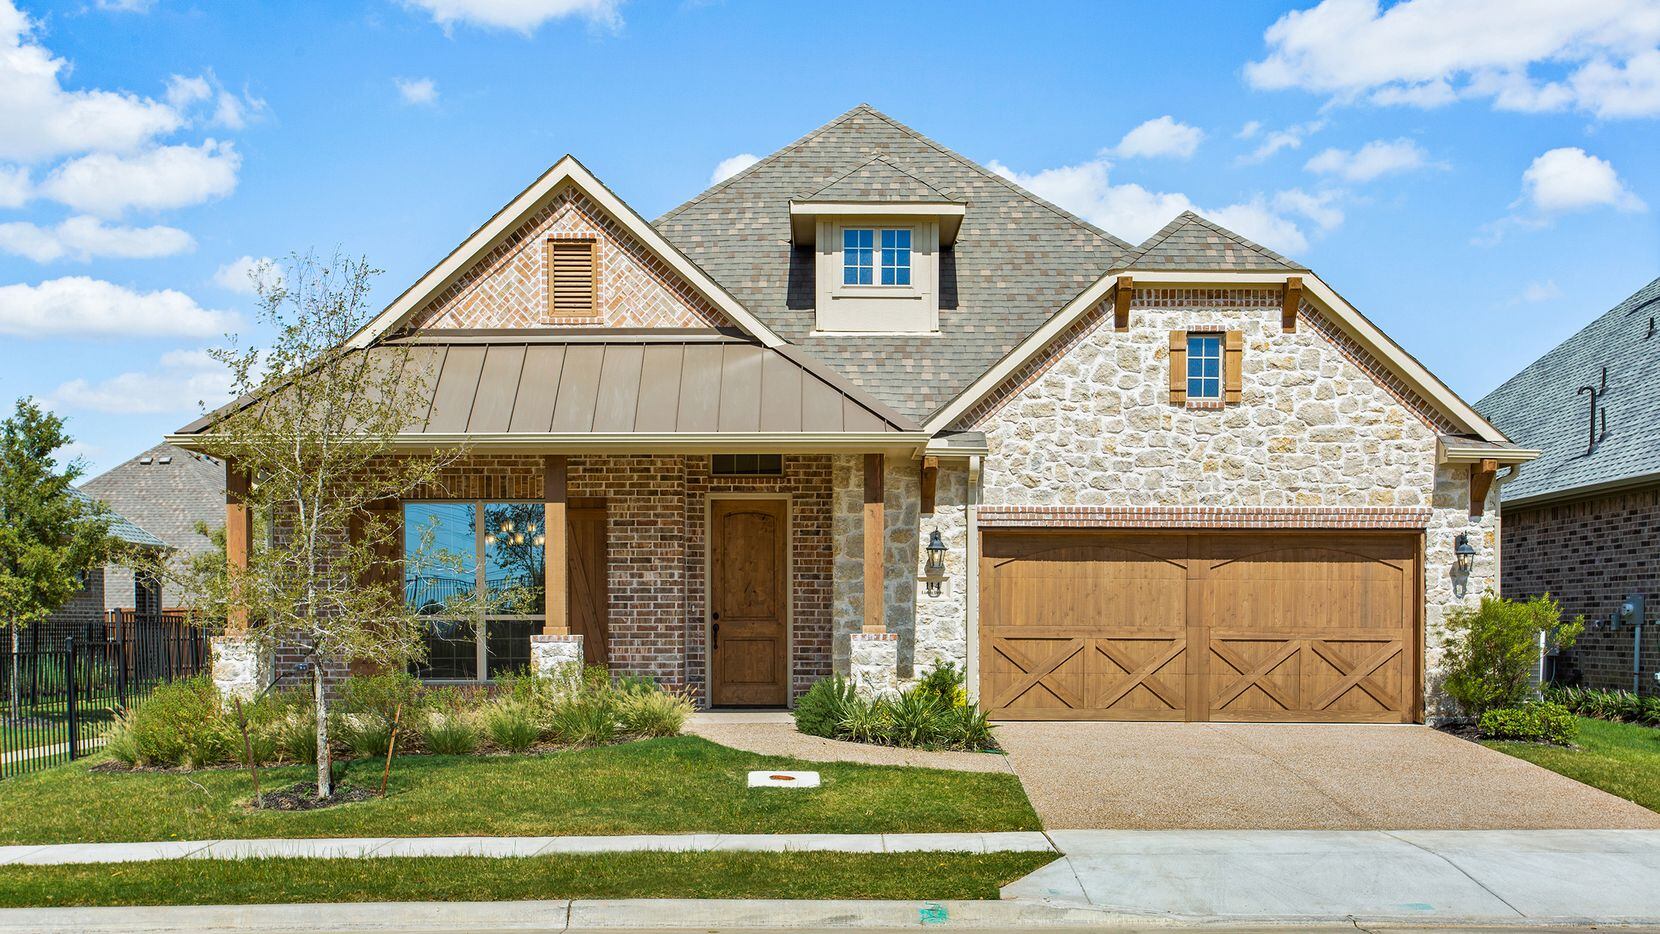 The final eight homes are for sale at Orchard Flower, an award-winning 55-plus community...